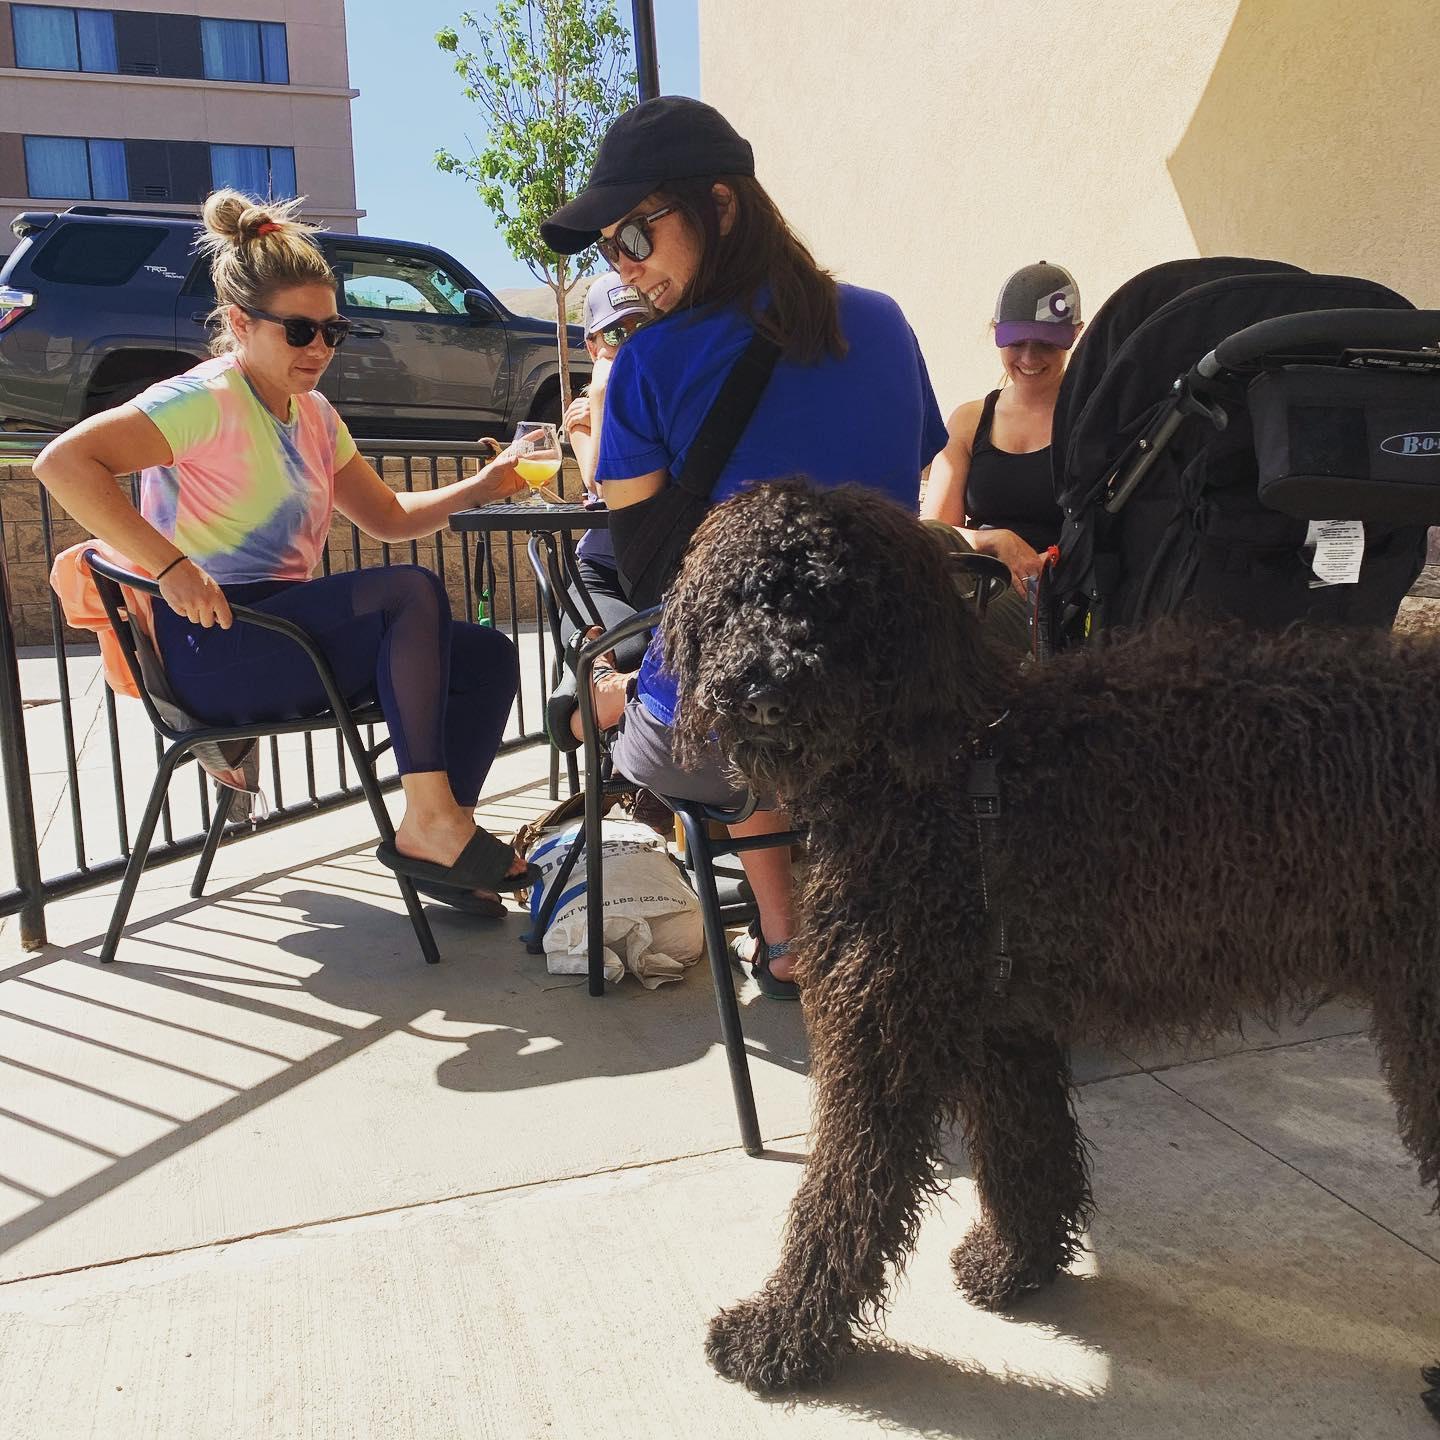 Pet Friendly Over Yonder Brewing Company